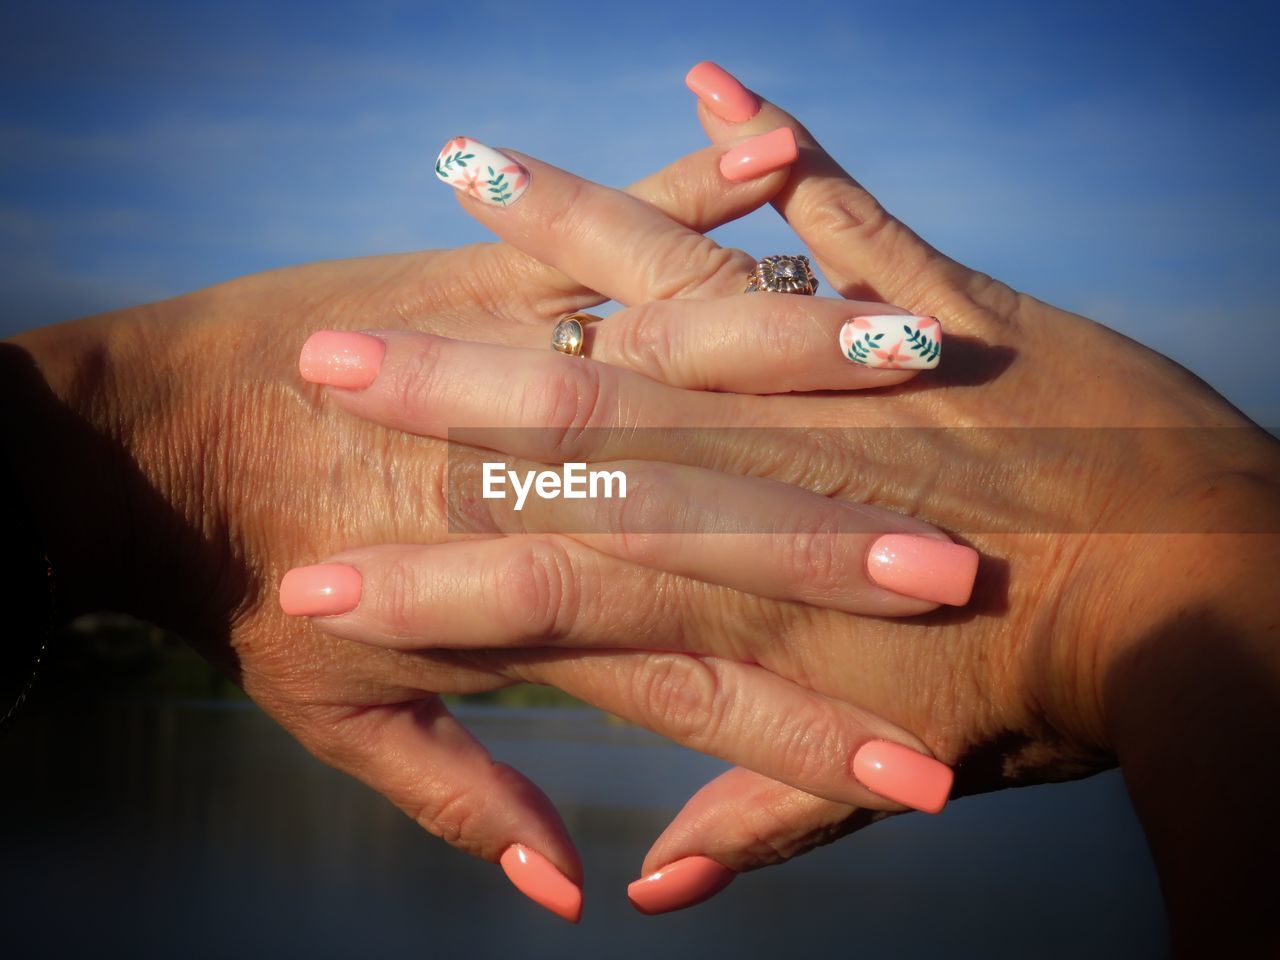 Cropped image of woman with hands clasped showing nail art